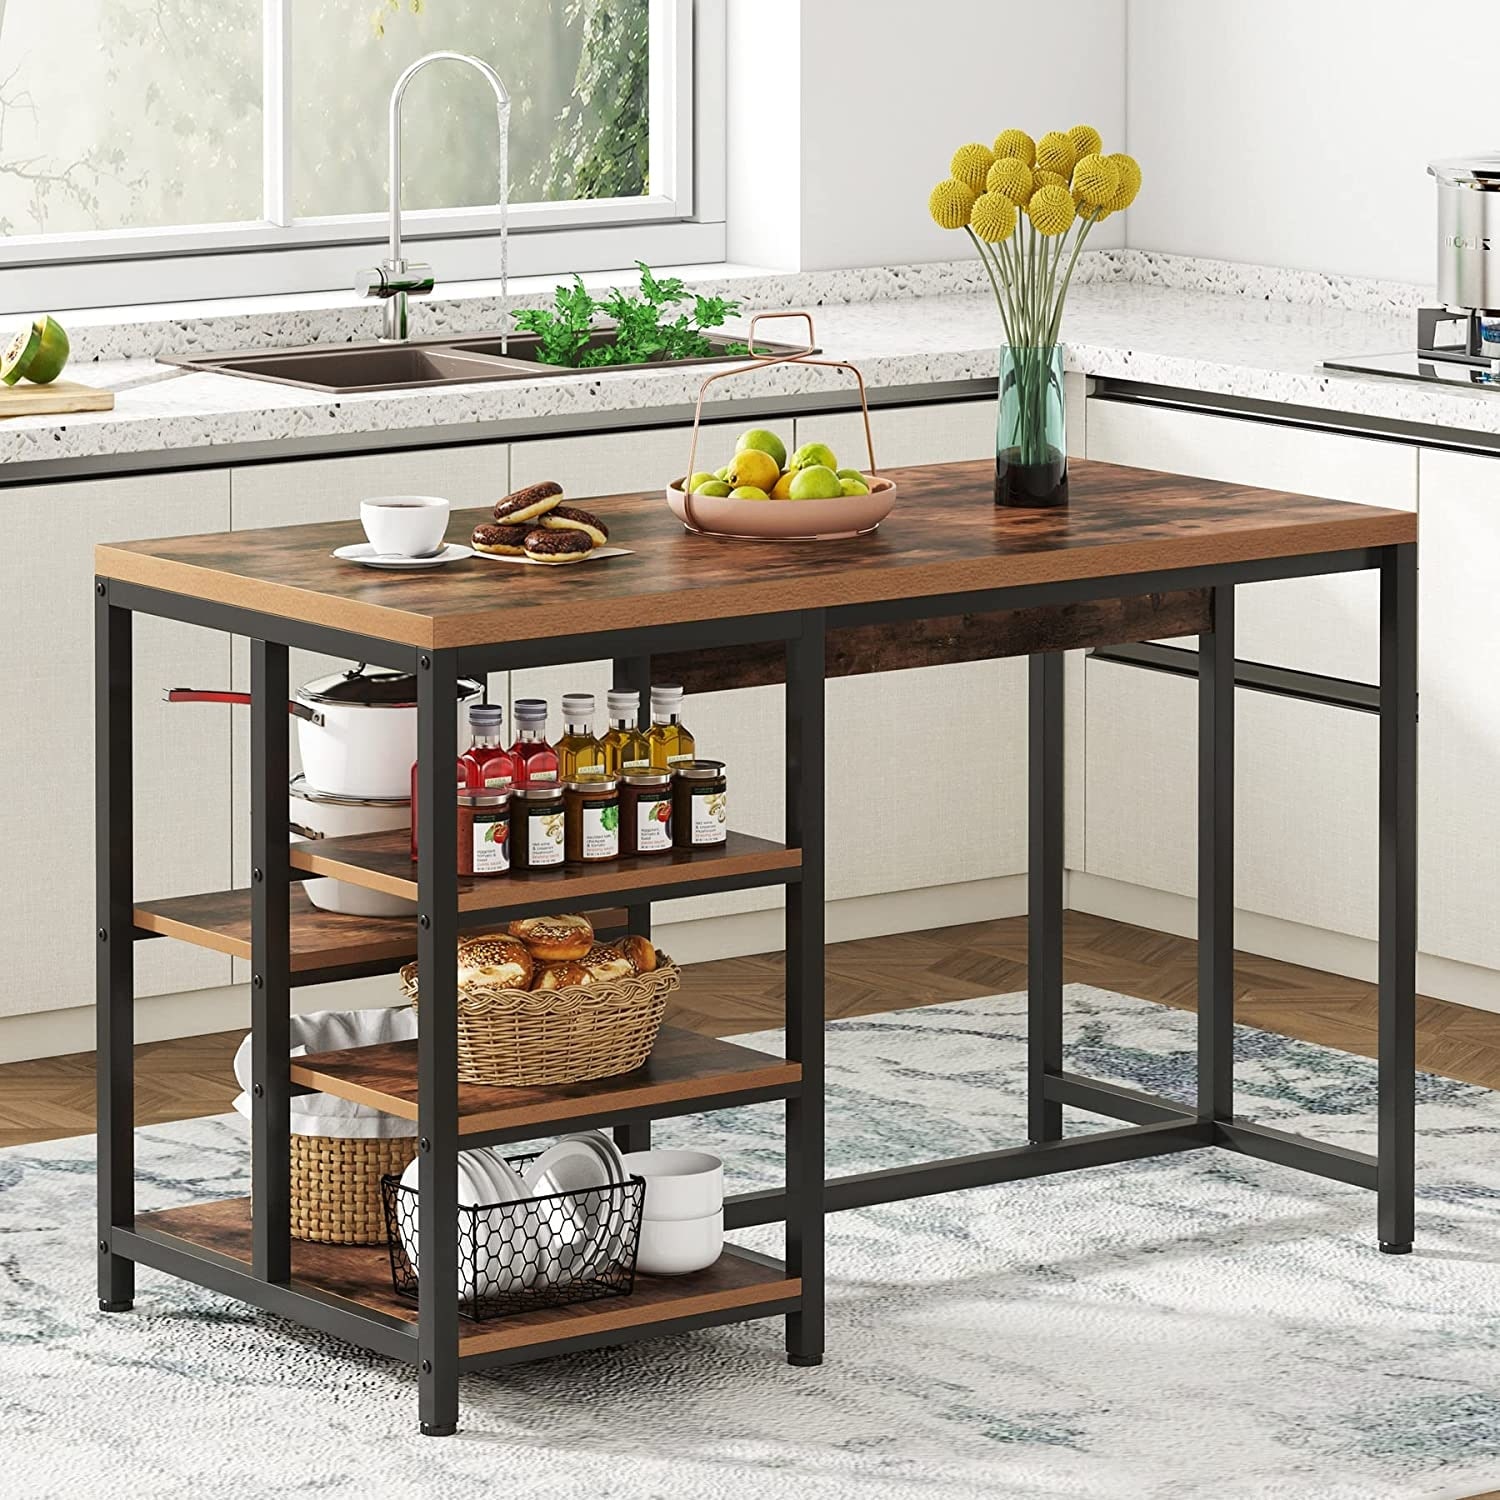 Tribesigns Kitchen Island with Storage Shelves,Small Dining Island Table with 5 Shelves for Kitchen, MDF and Metal,Rustic Brown XK00053